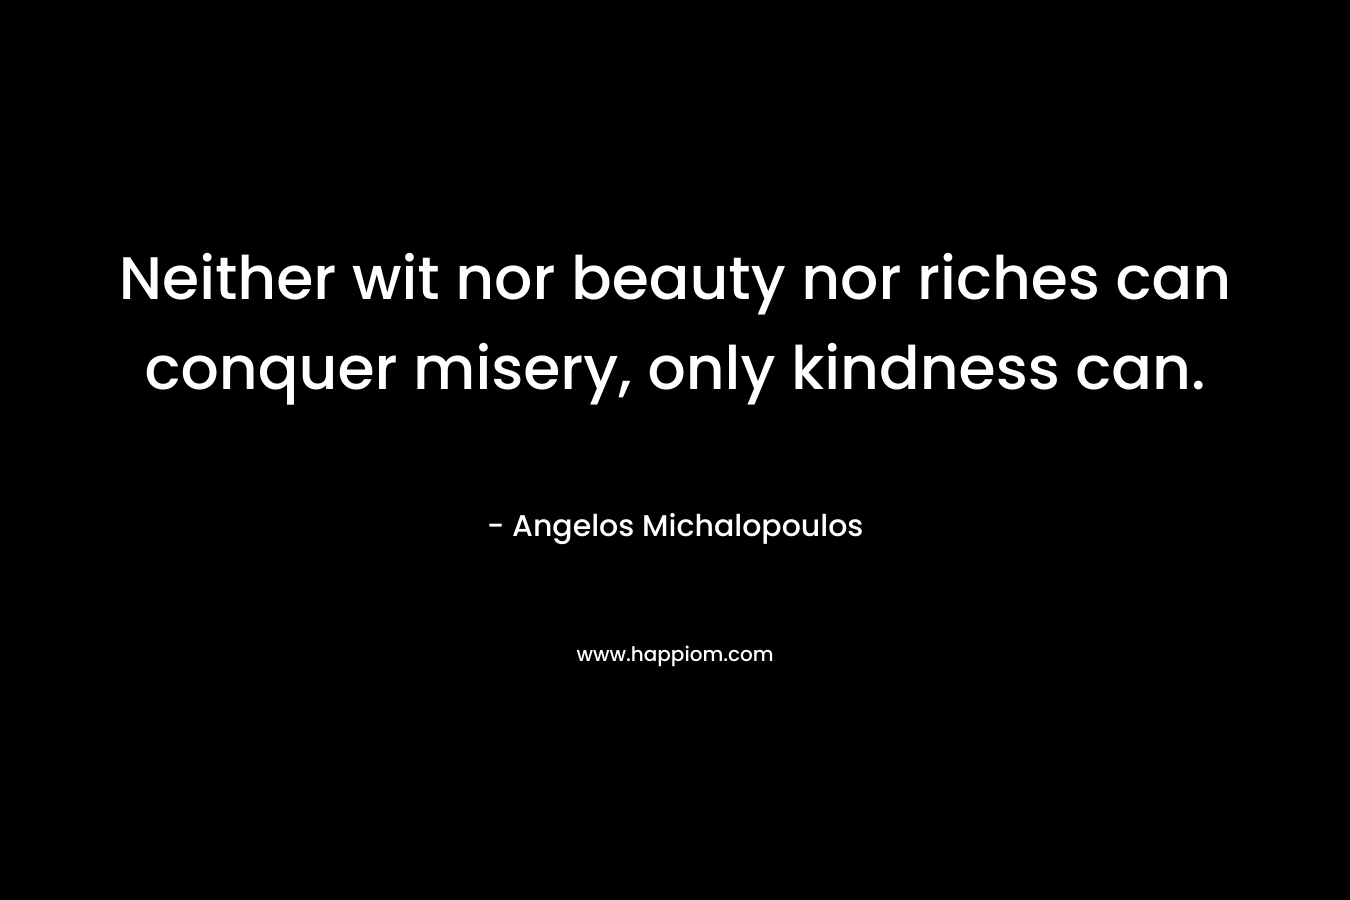 Neither wit nor beauty nor riches can conquer misery, only kindness can.